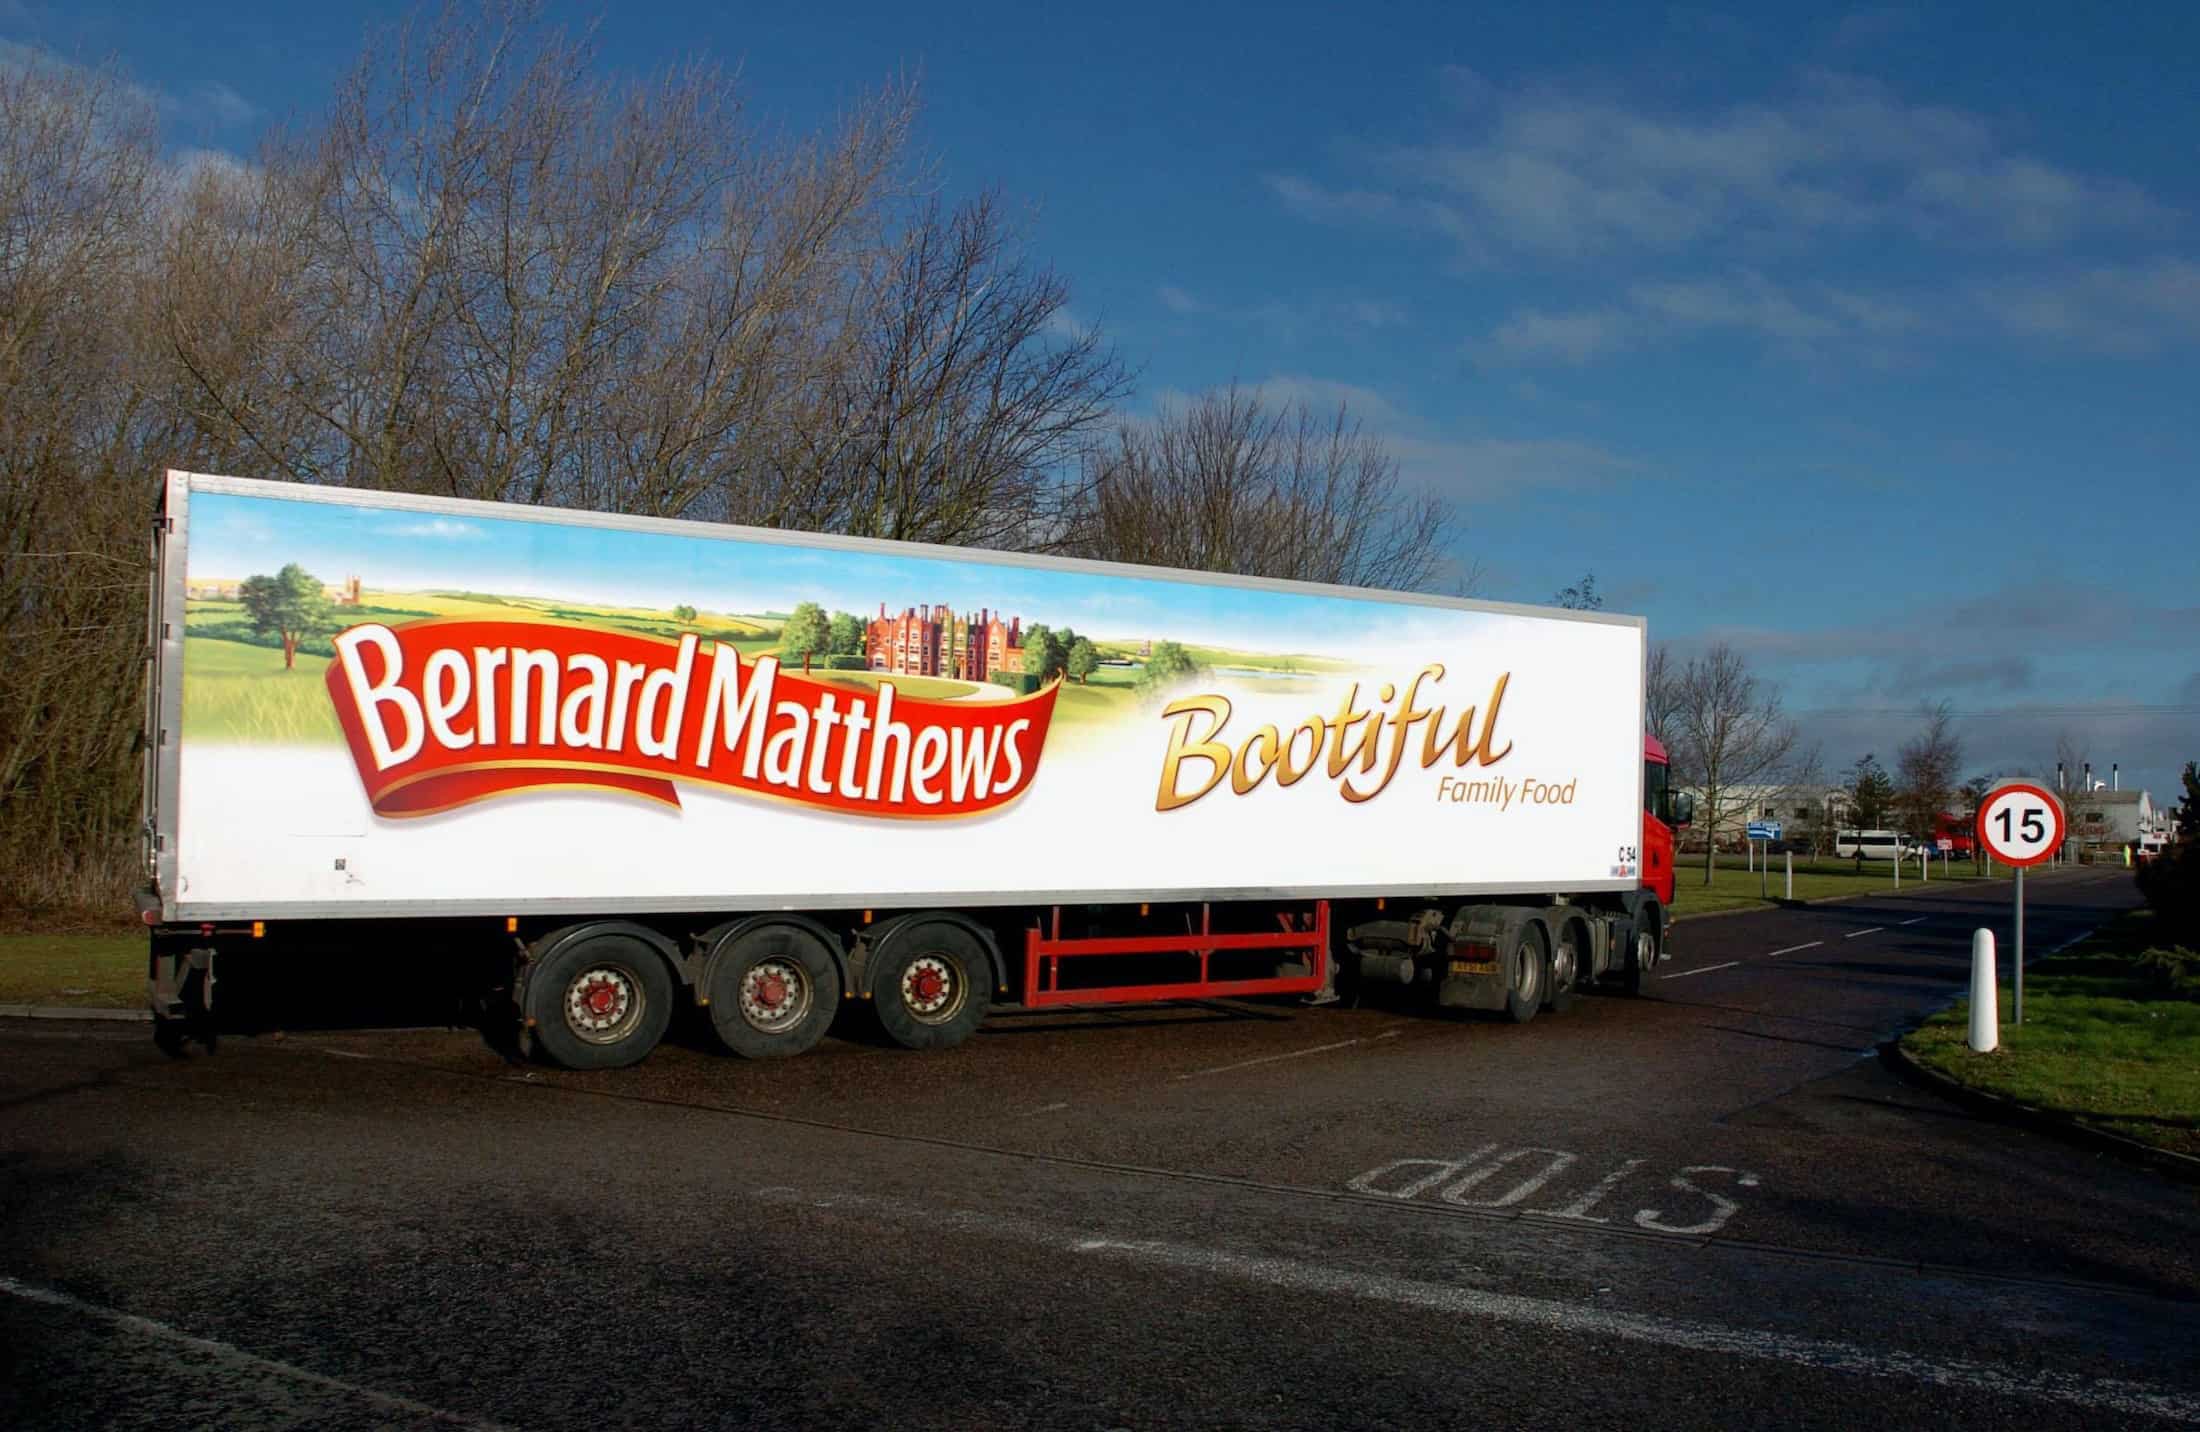 More staff have Covid at Bernard Matthews turkey plant as 170 test positive at separate meat factory